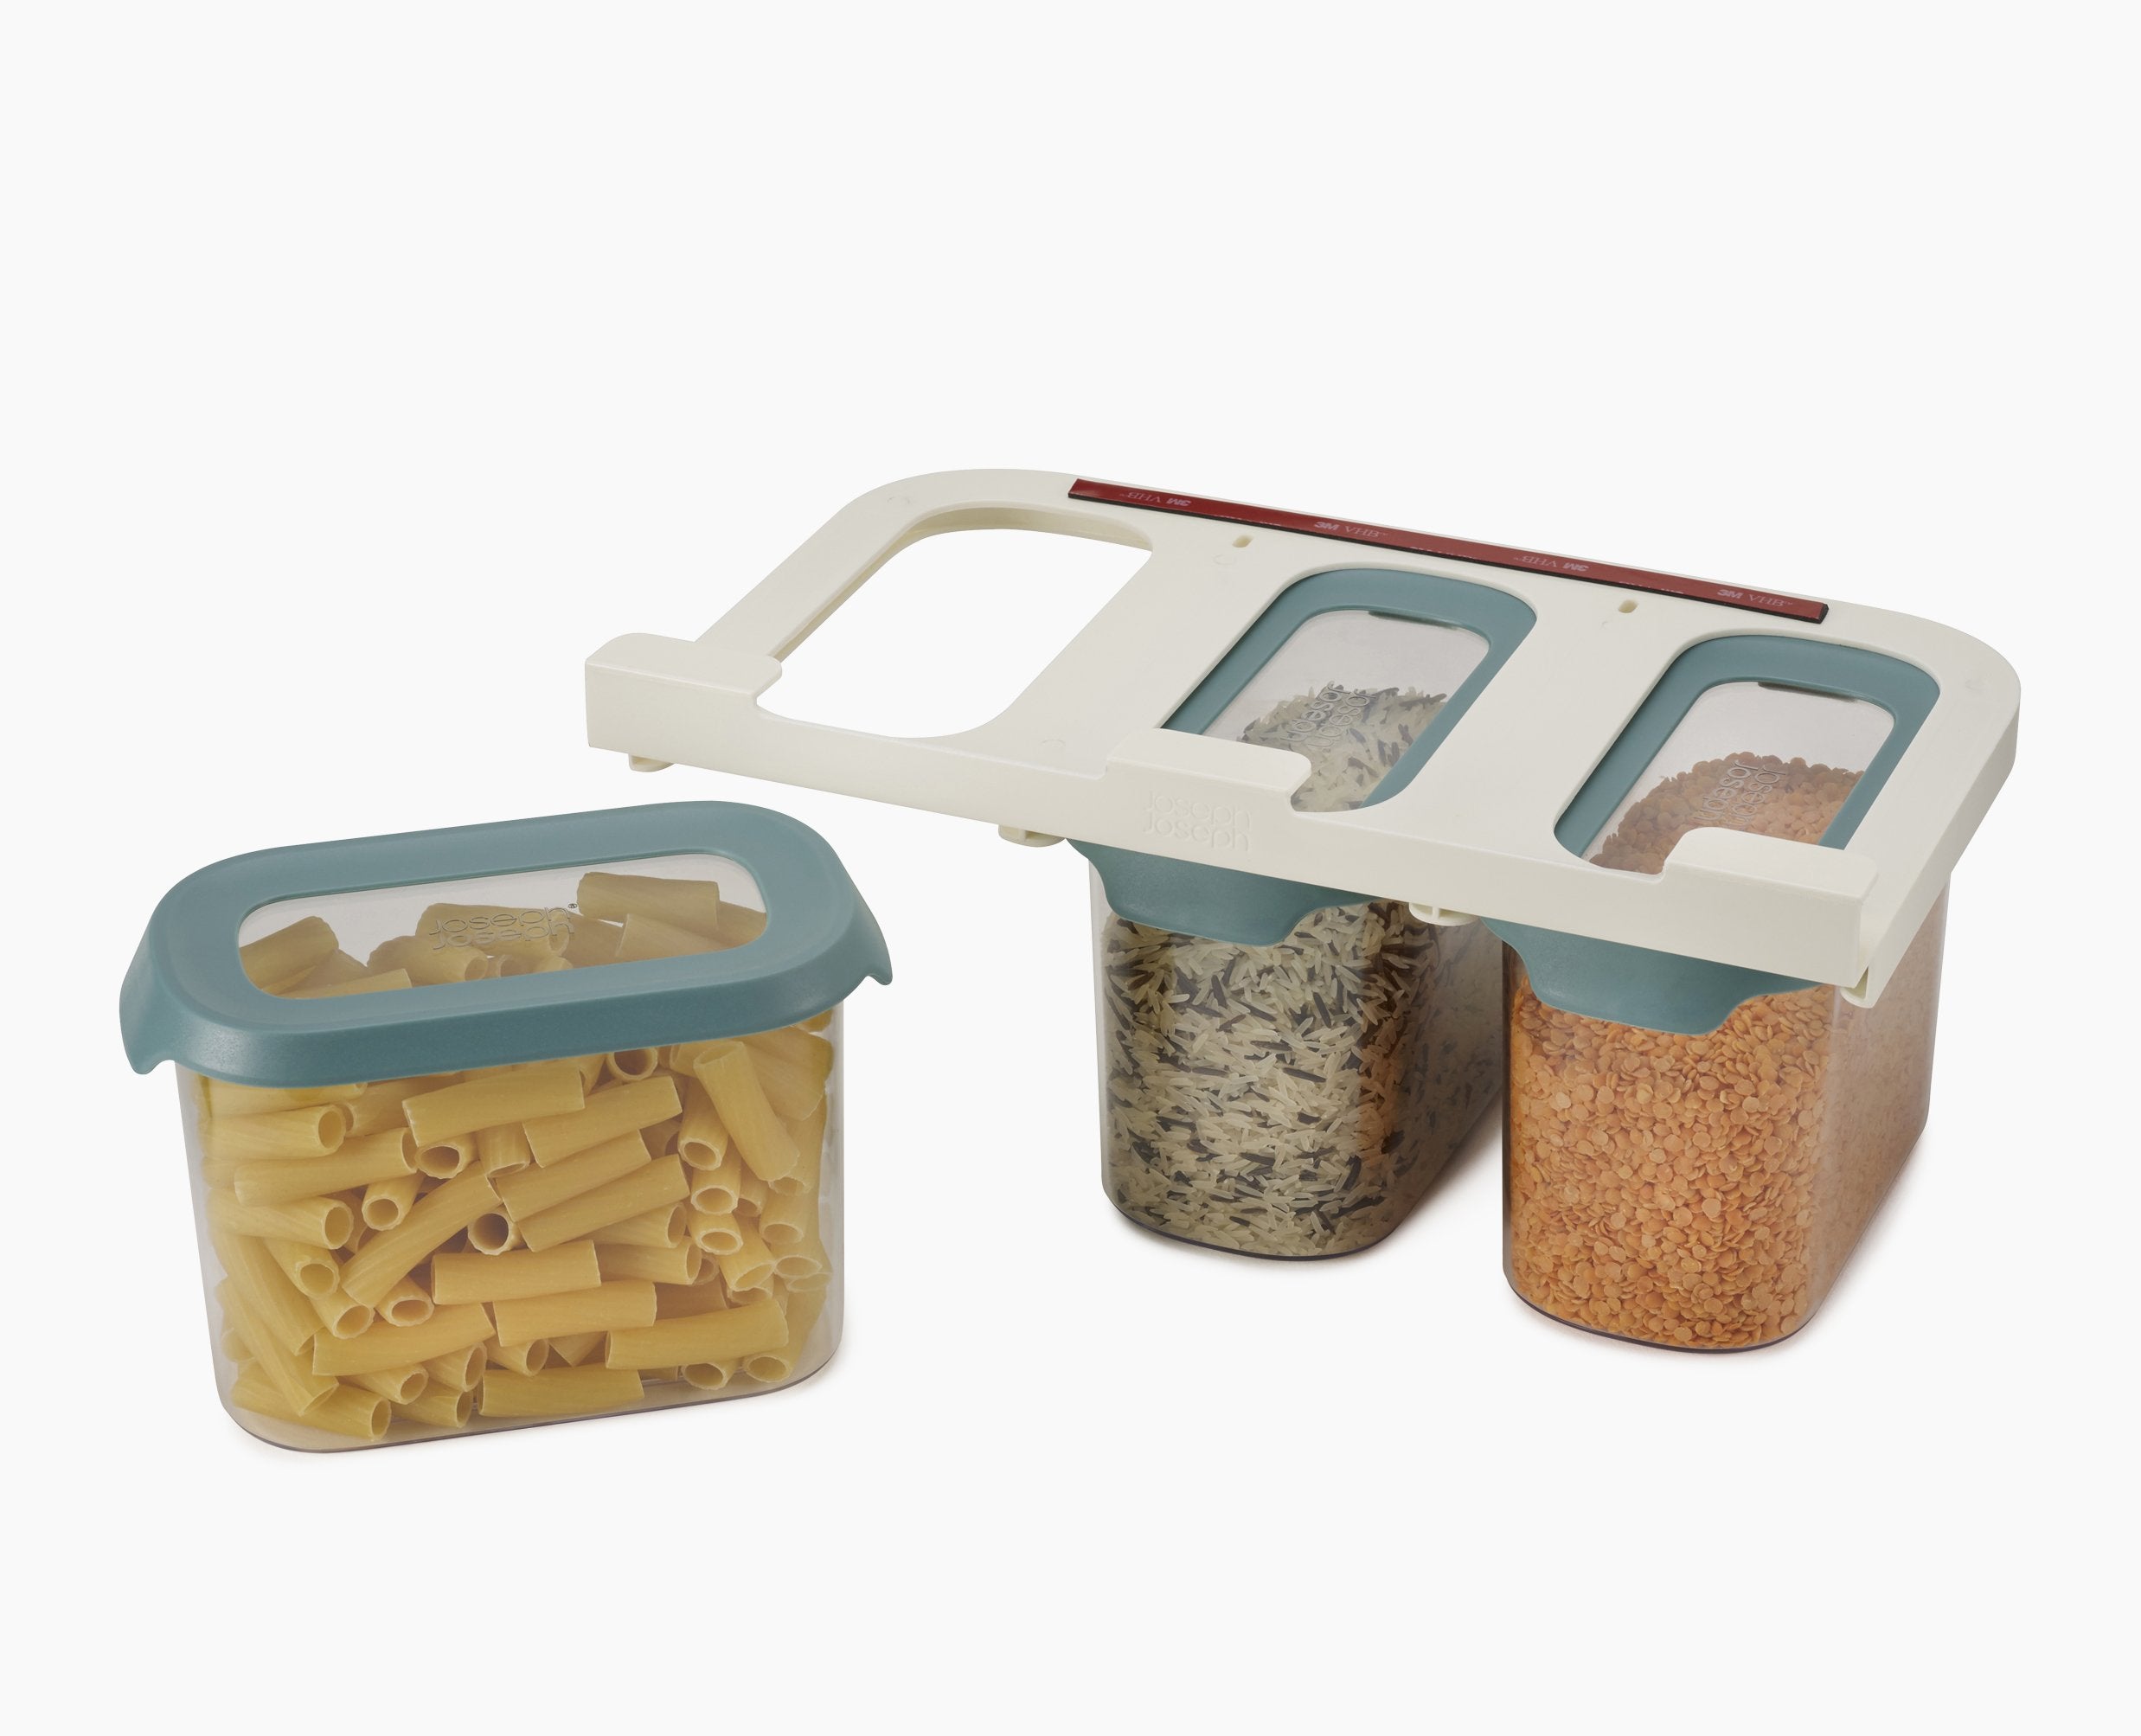 BEON.COM.AU  These innovative food storage container sets make use of unused space beneath your shelves, thereby maximising every inch of your cupboard area.  Unique design utilises unused space beneath the shelf 1.3L set includes 3 x 1.3L (1.3 qt) containers plus storage rail Can be mounted inside or beneat... Joseph Joseph at BEON.COM.AU